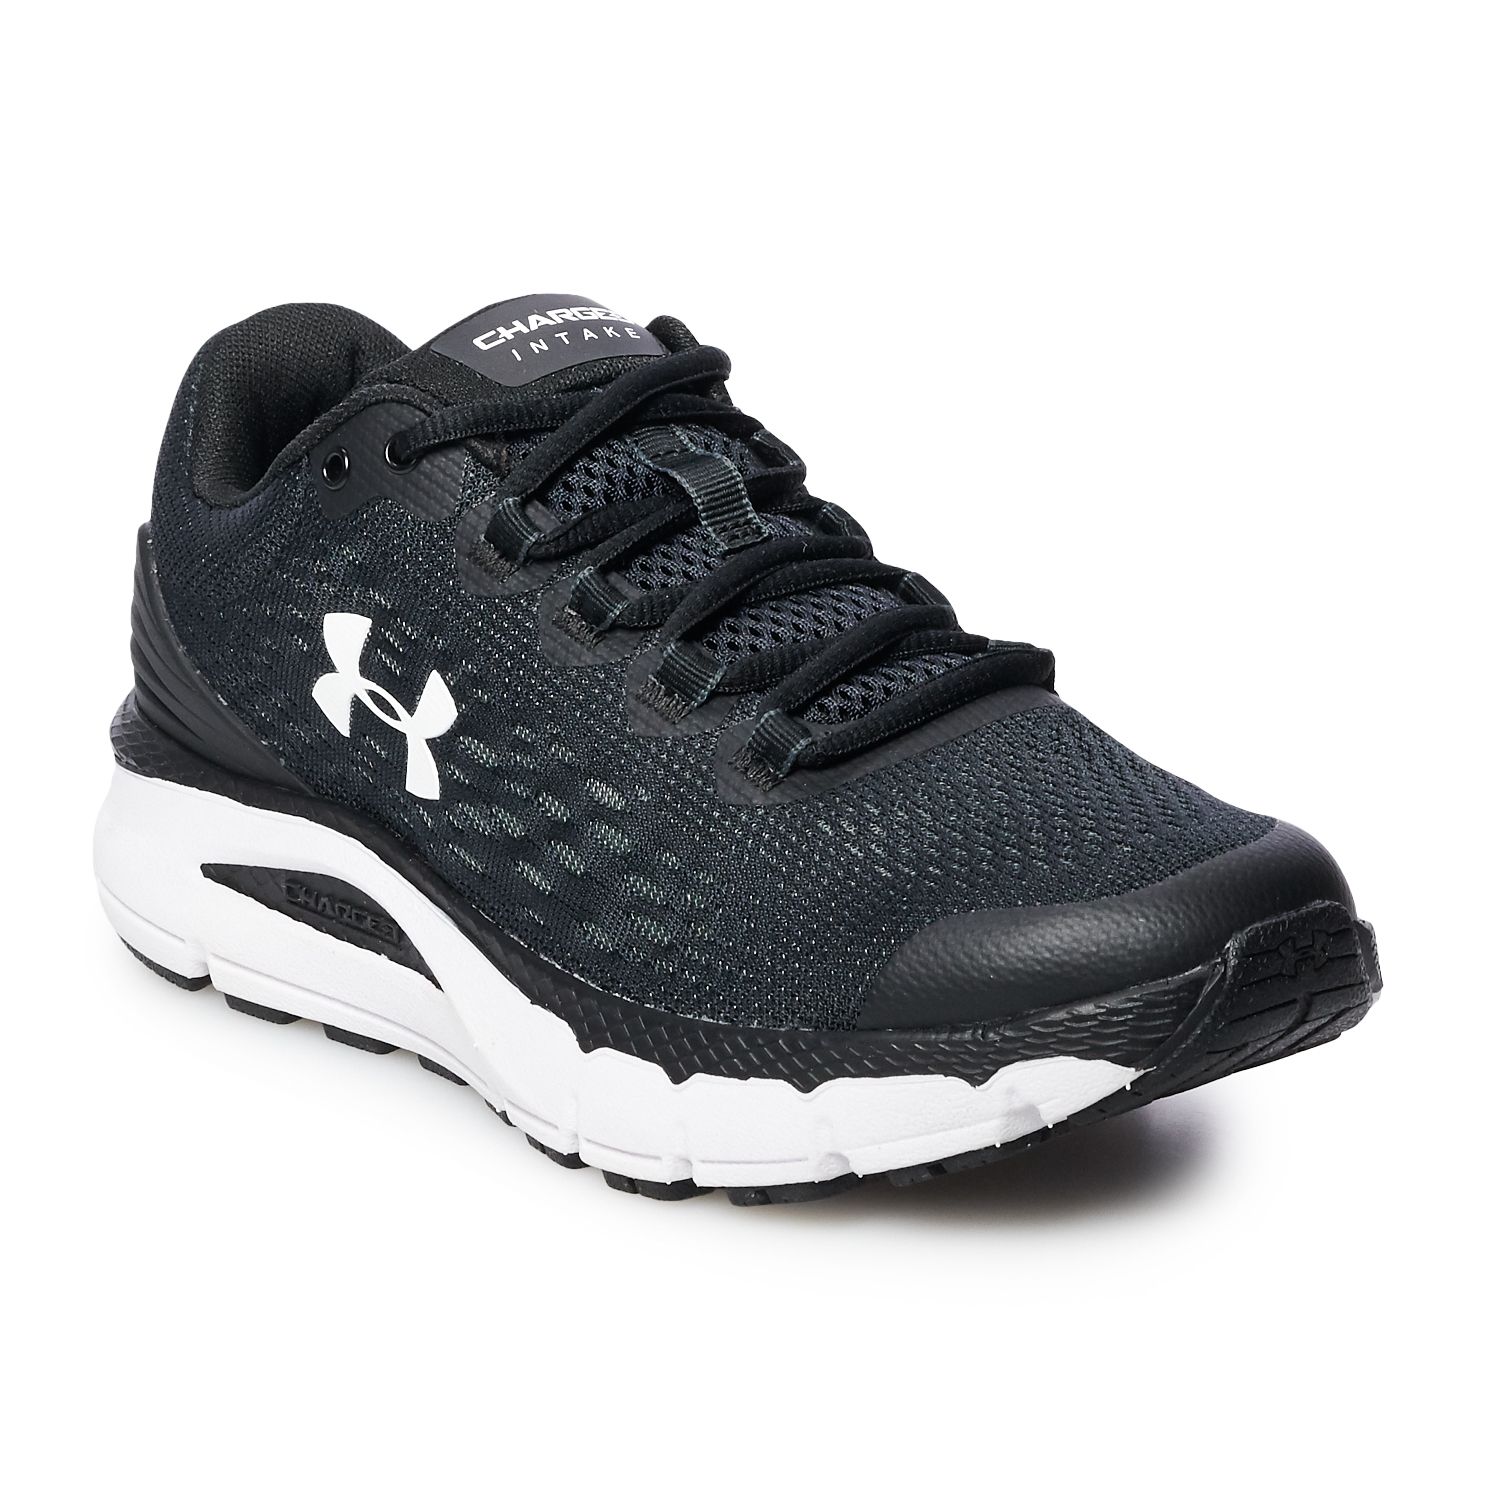 under armour shoes at kohls